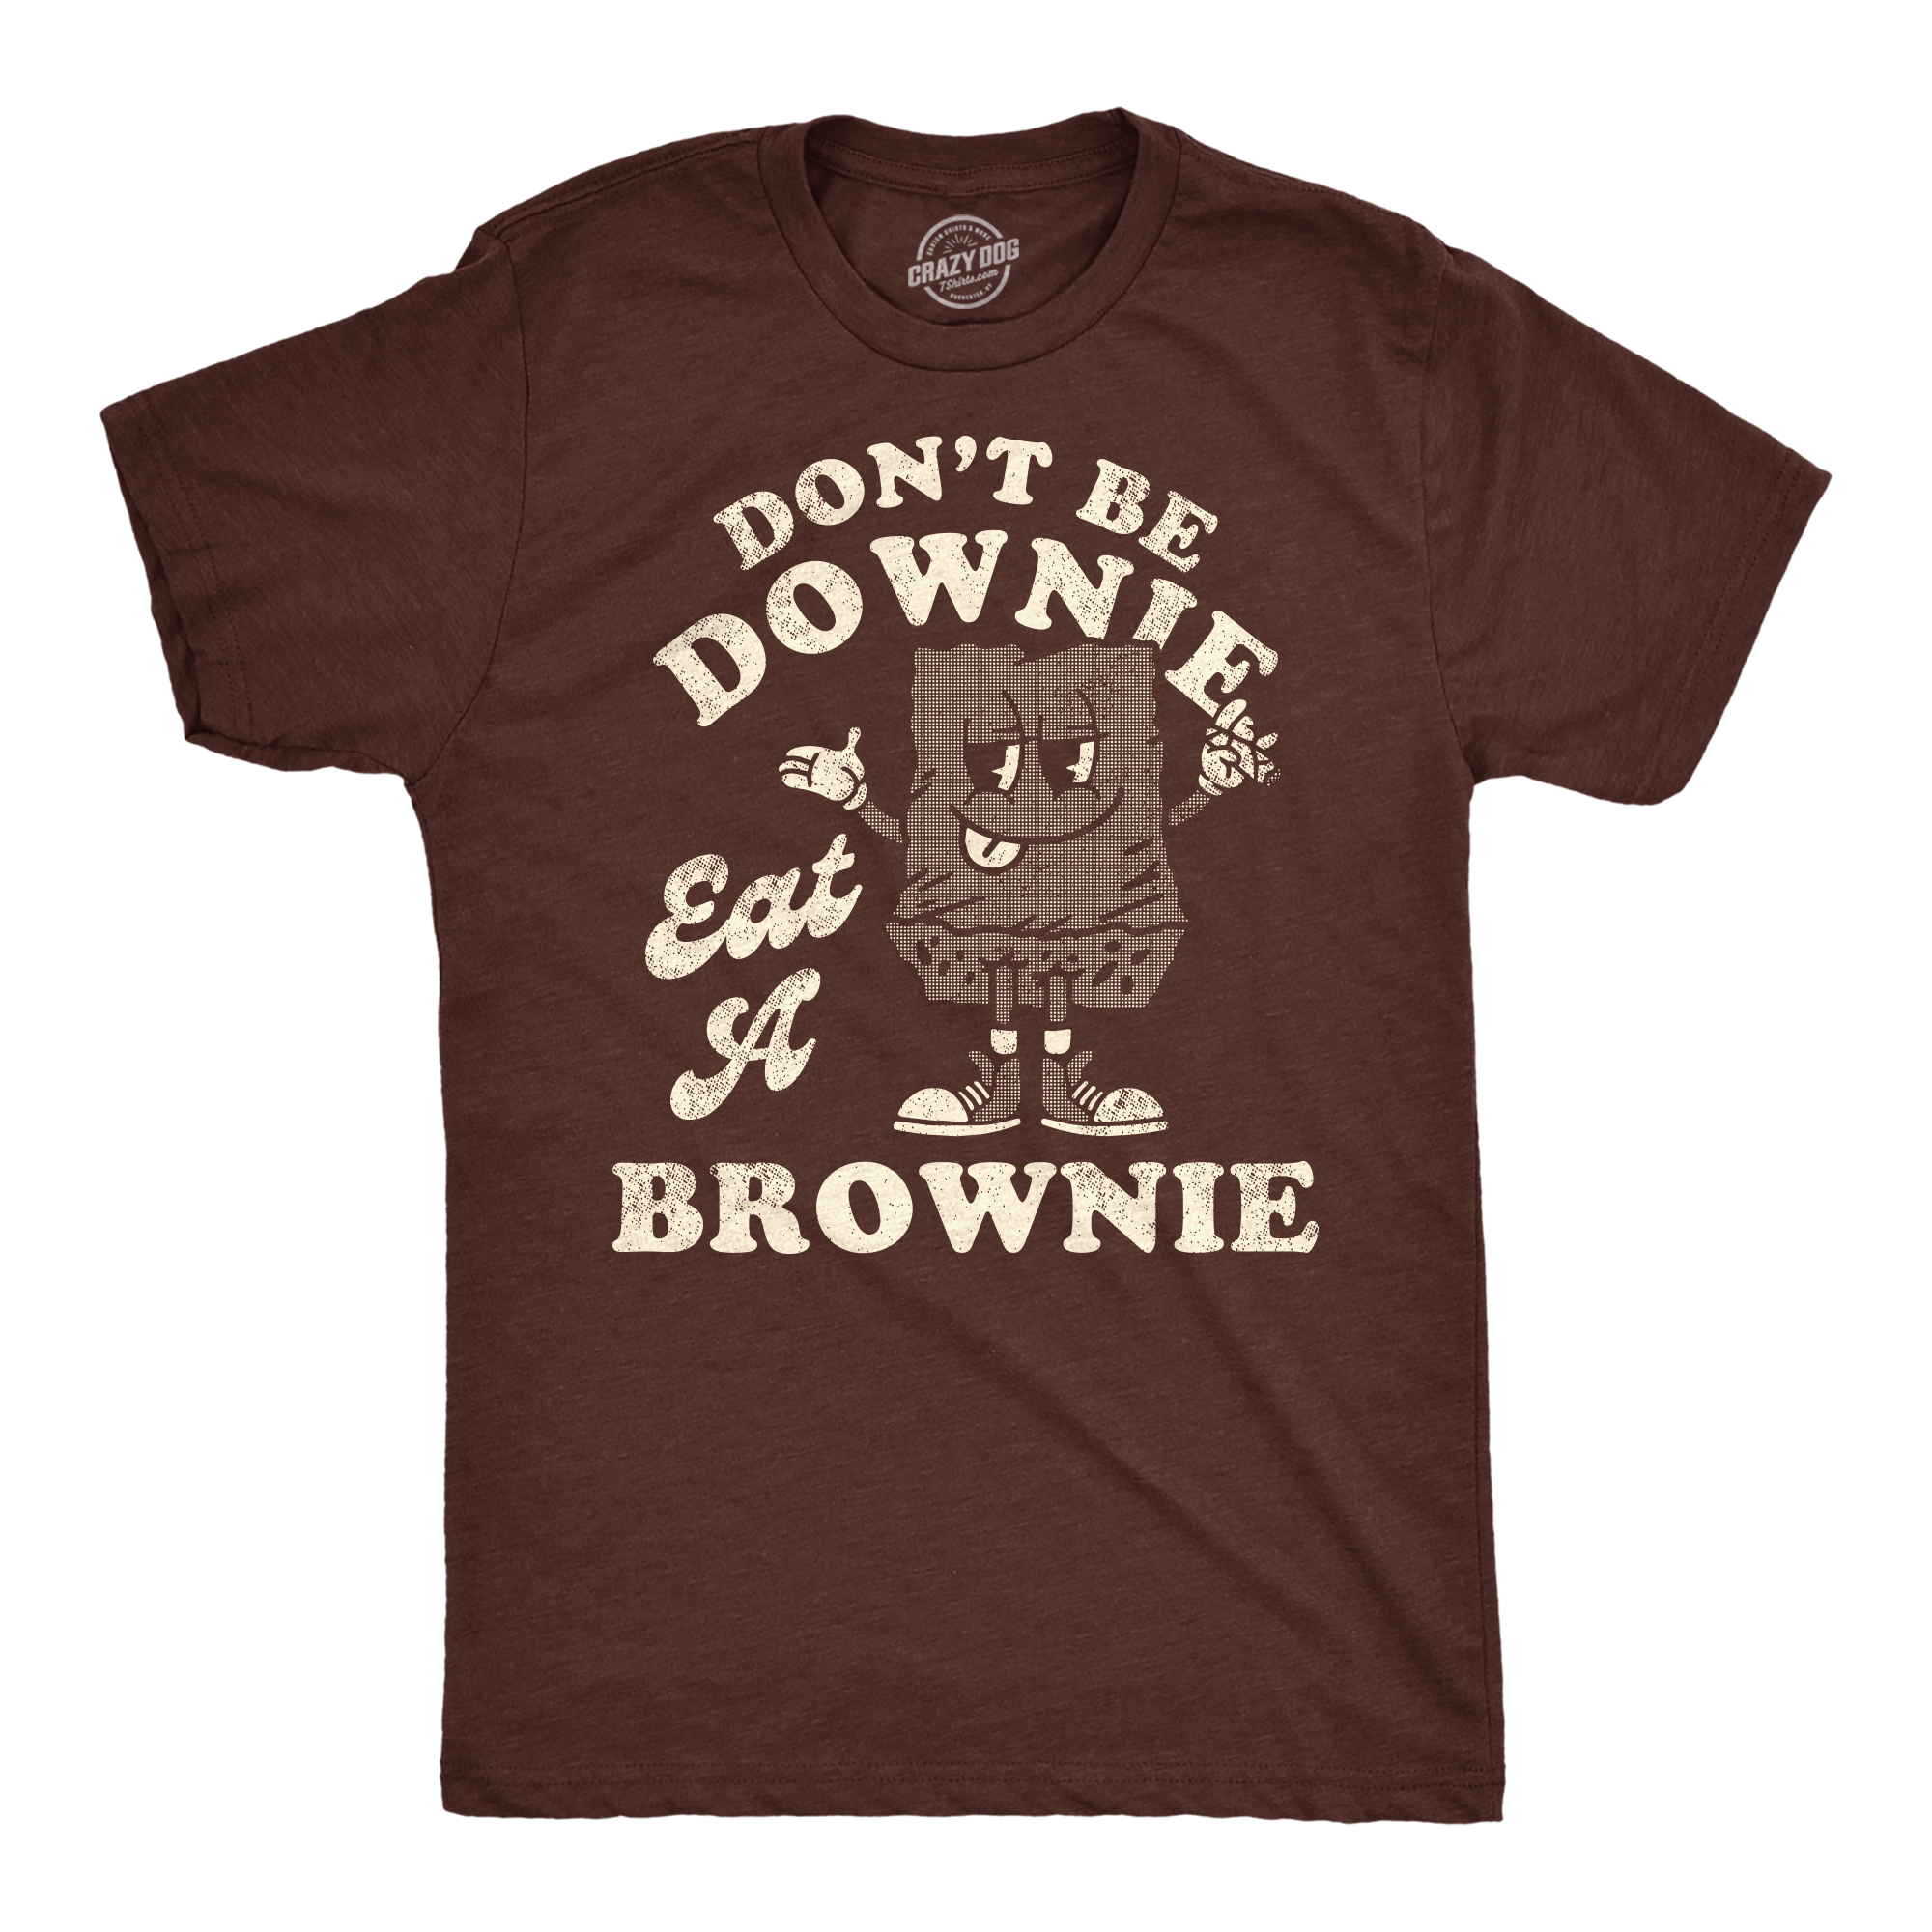 Funny Heather Brown - Eat A Brownie Dont Be A Downie Eat A Brownie Mens T Shirt Nerdy 420 Food sarcastic Tee